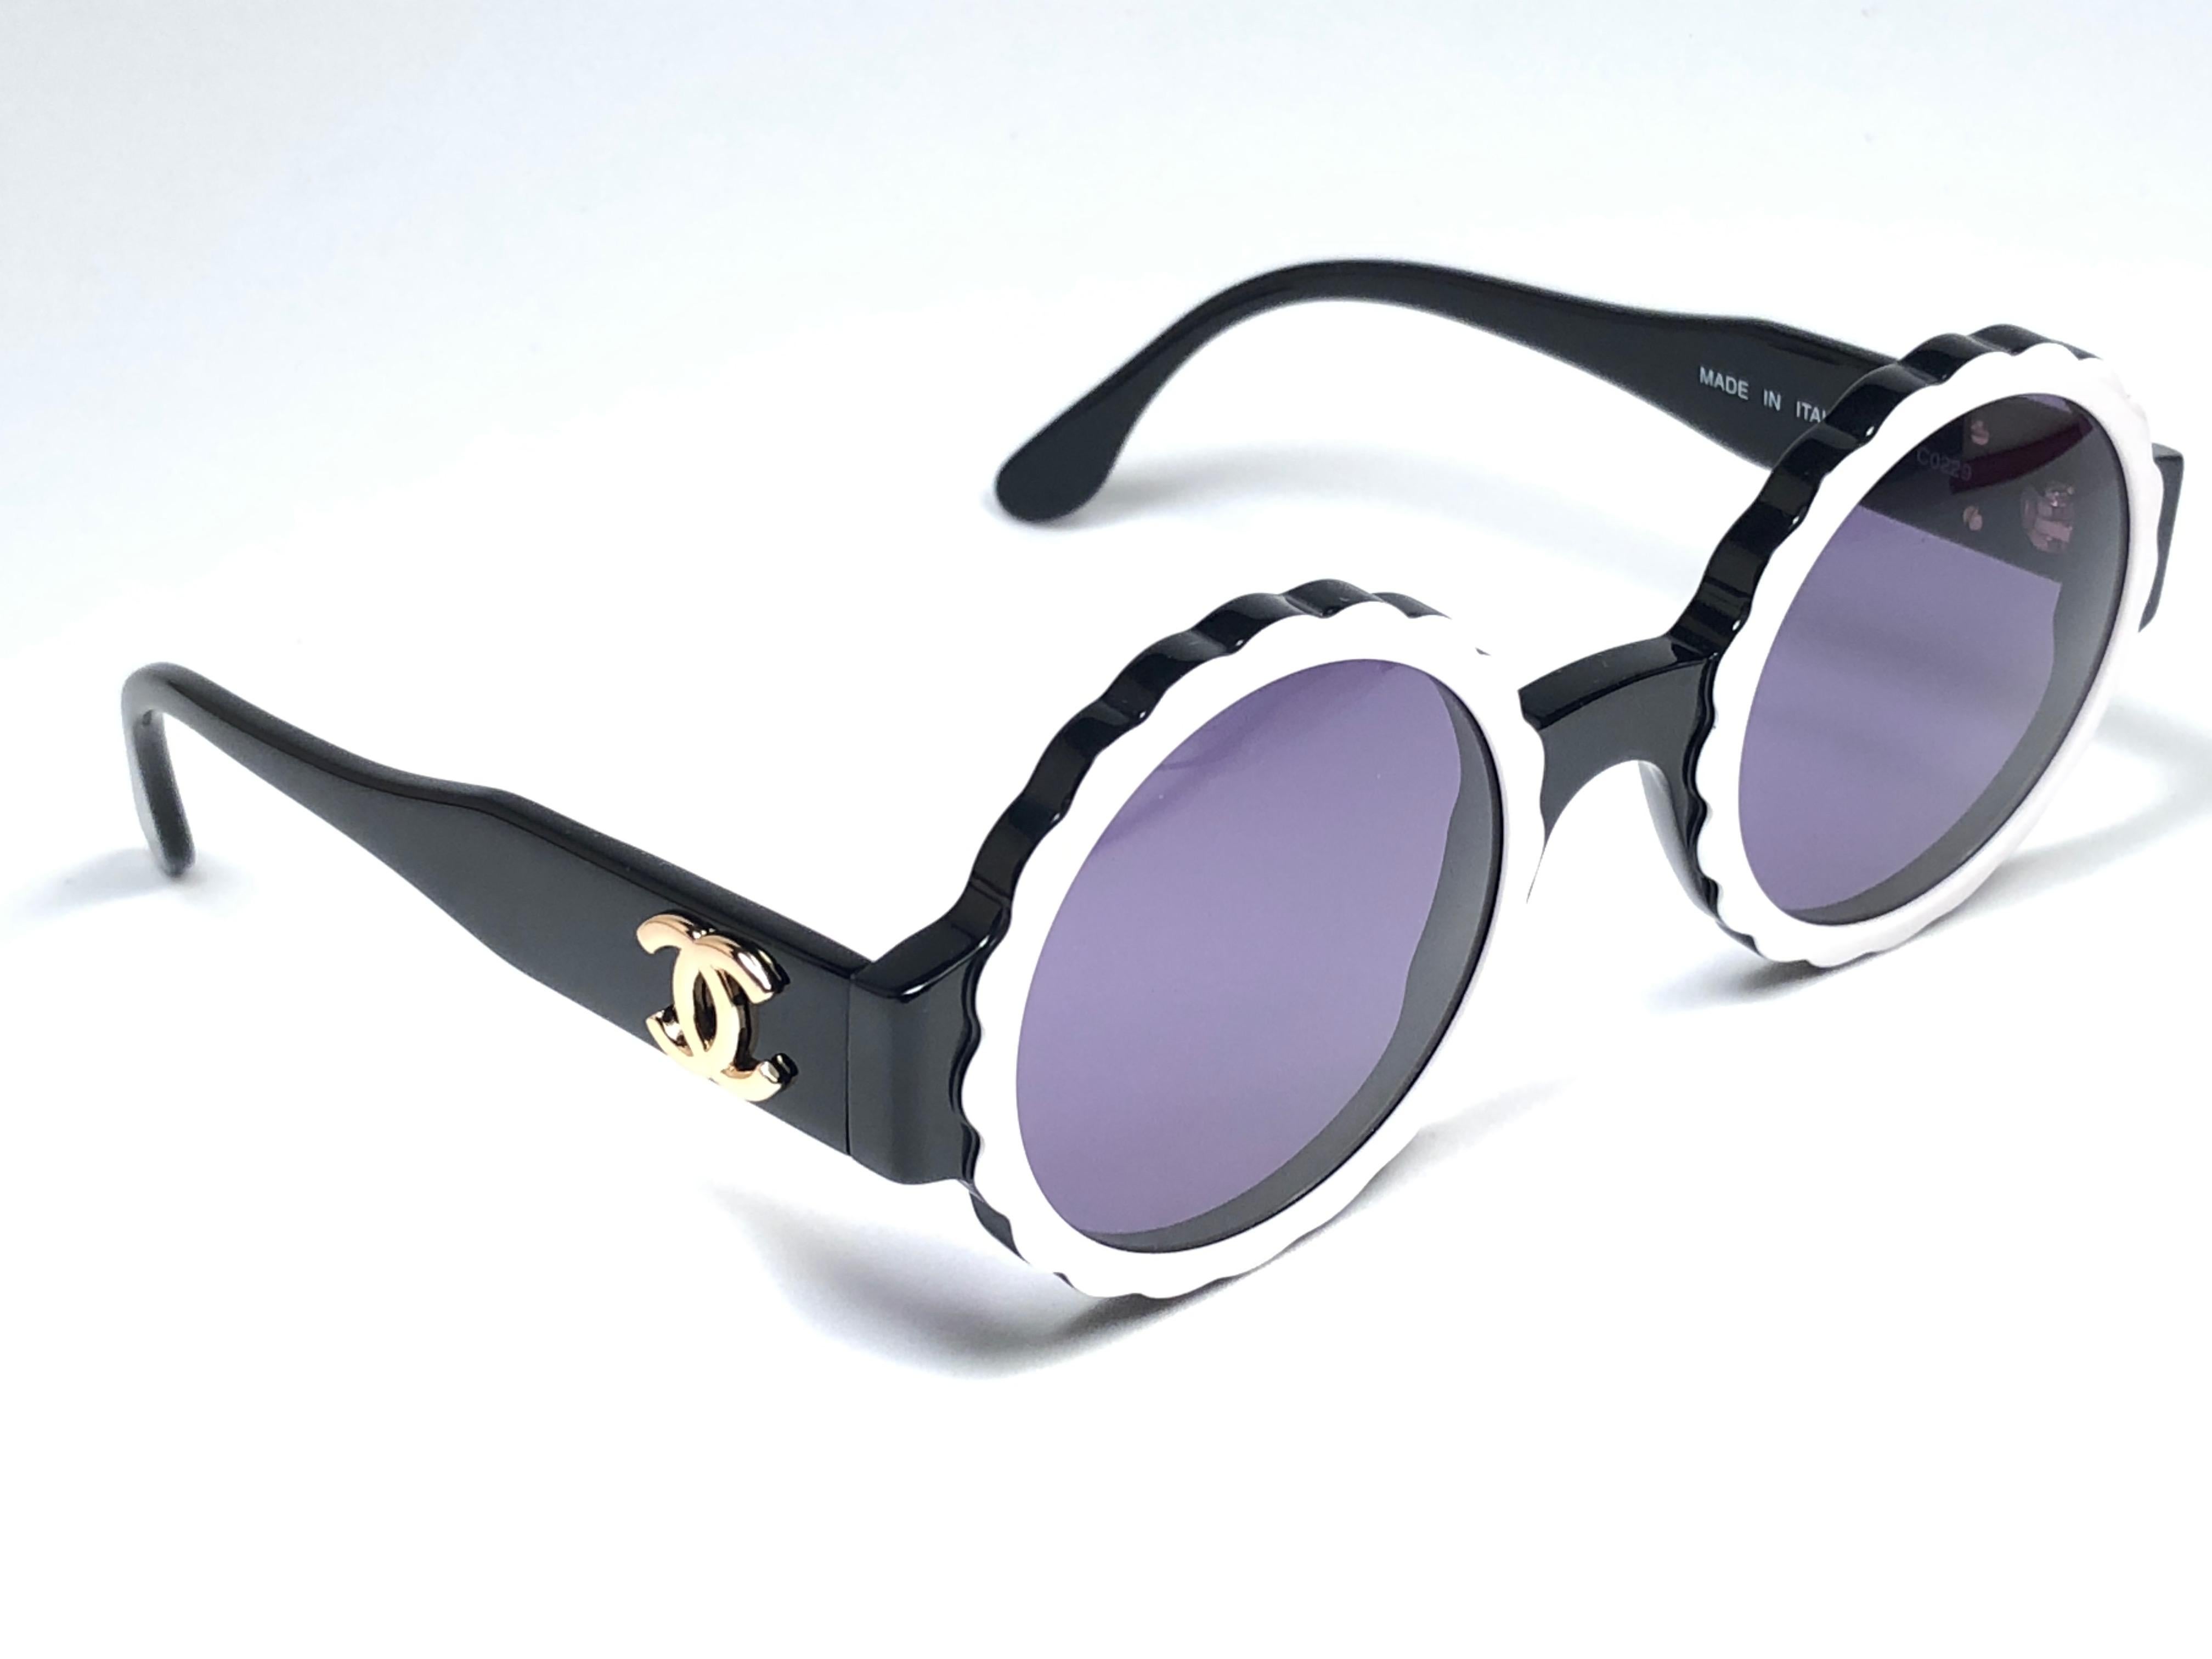 New Rare Vintage Chanel Spring Summer 1993 sunglasses.

A seldom and unique piece in this new, never displayed or worn condition.

This pair of Chanel sunglasses is an absolute showstopper.

This pair may show minor sign of wear due to storage.